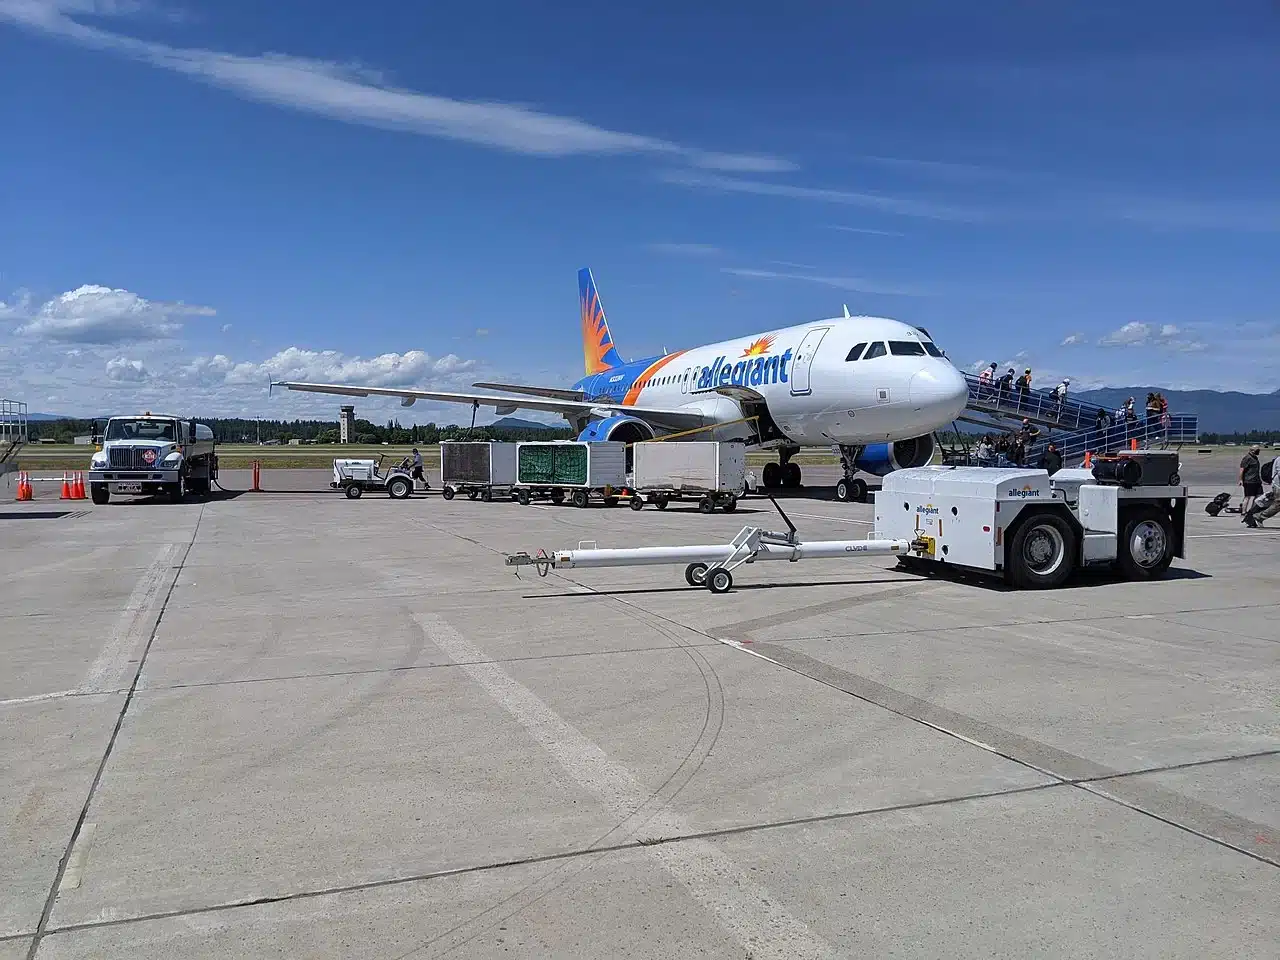 Allegiant Air Airbus A320 boarding passengers at the ramp.